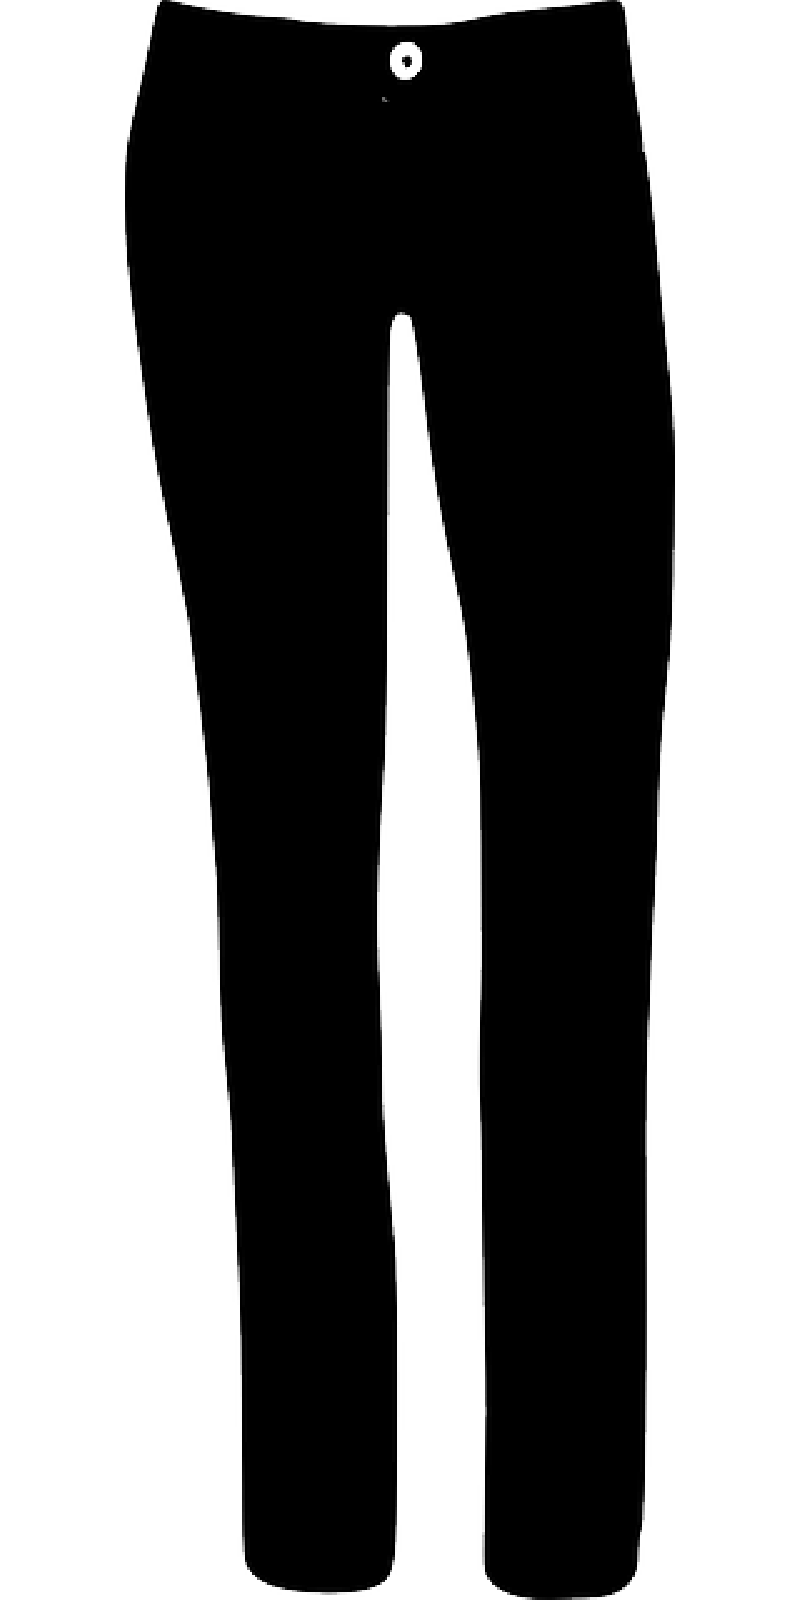 Trousers PNG Image